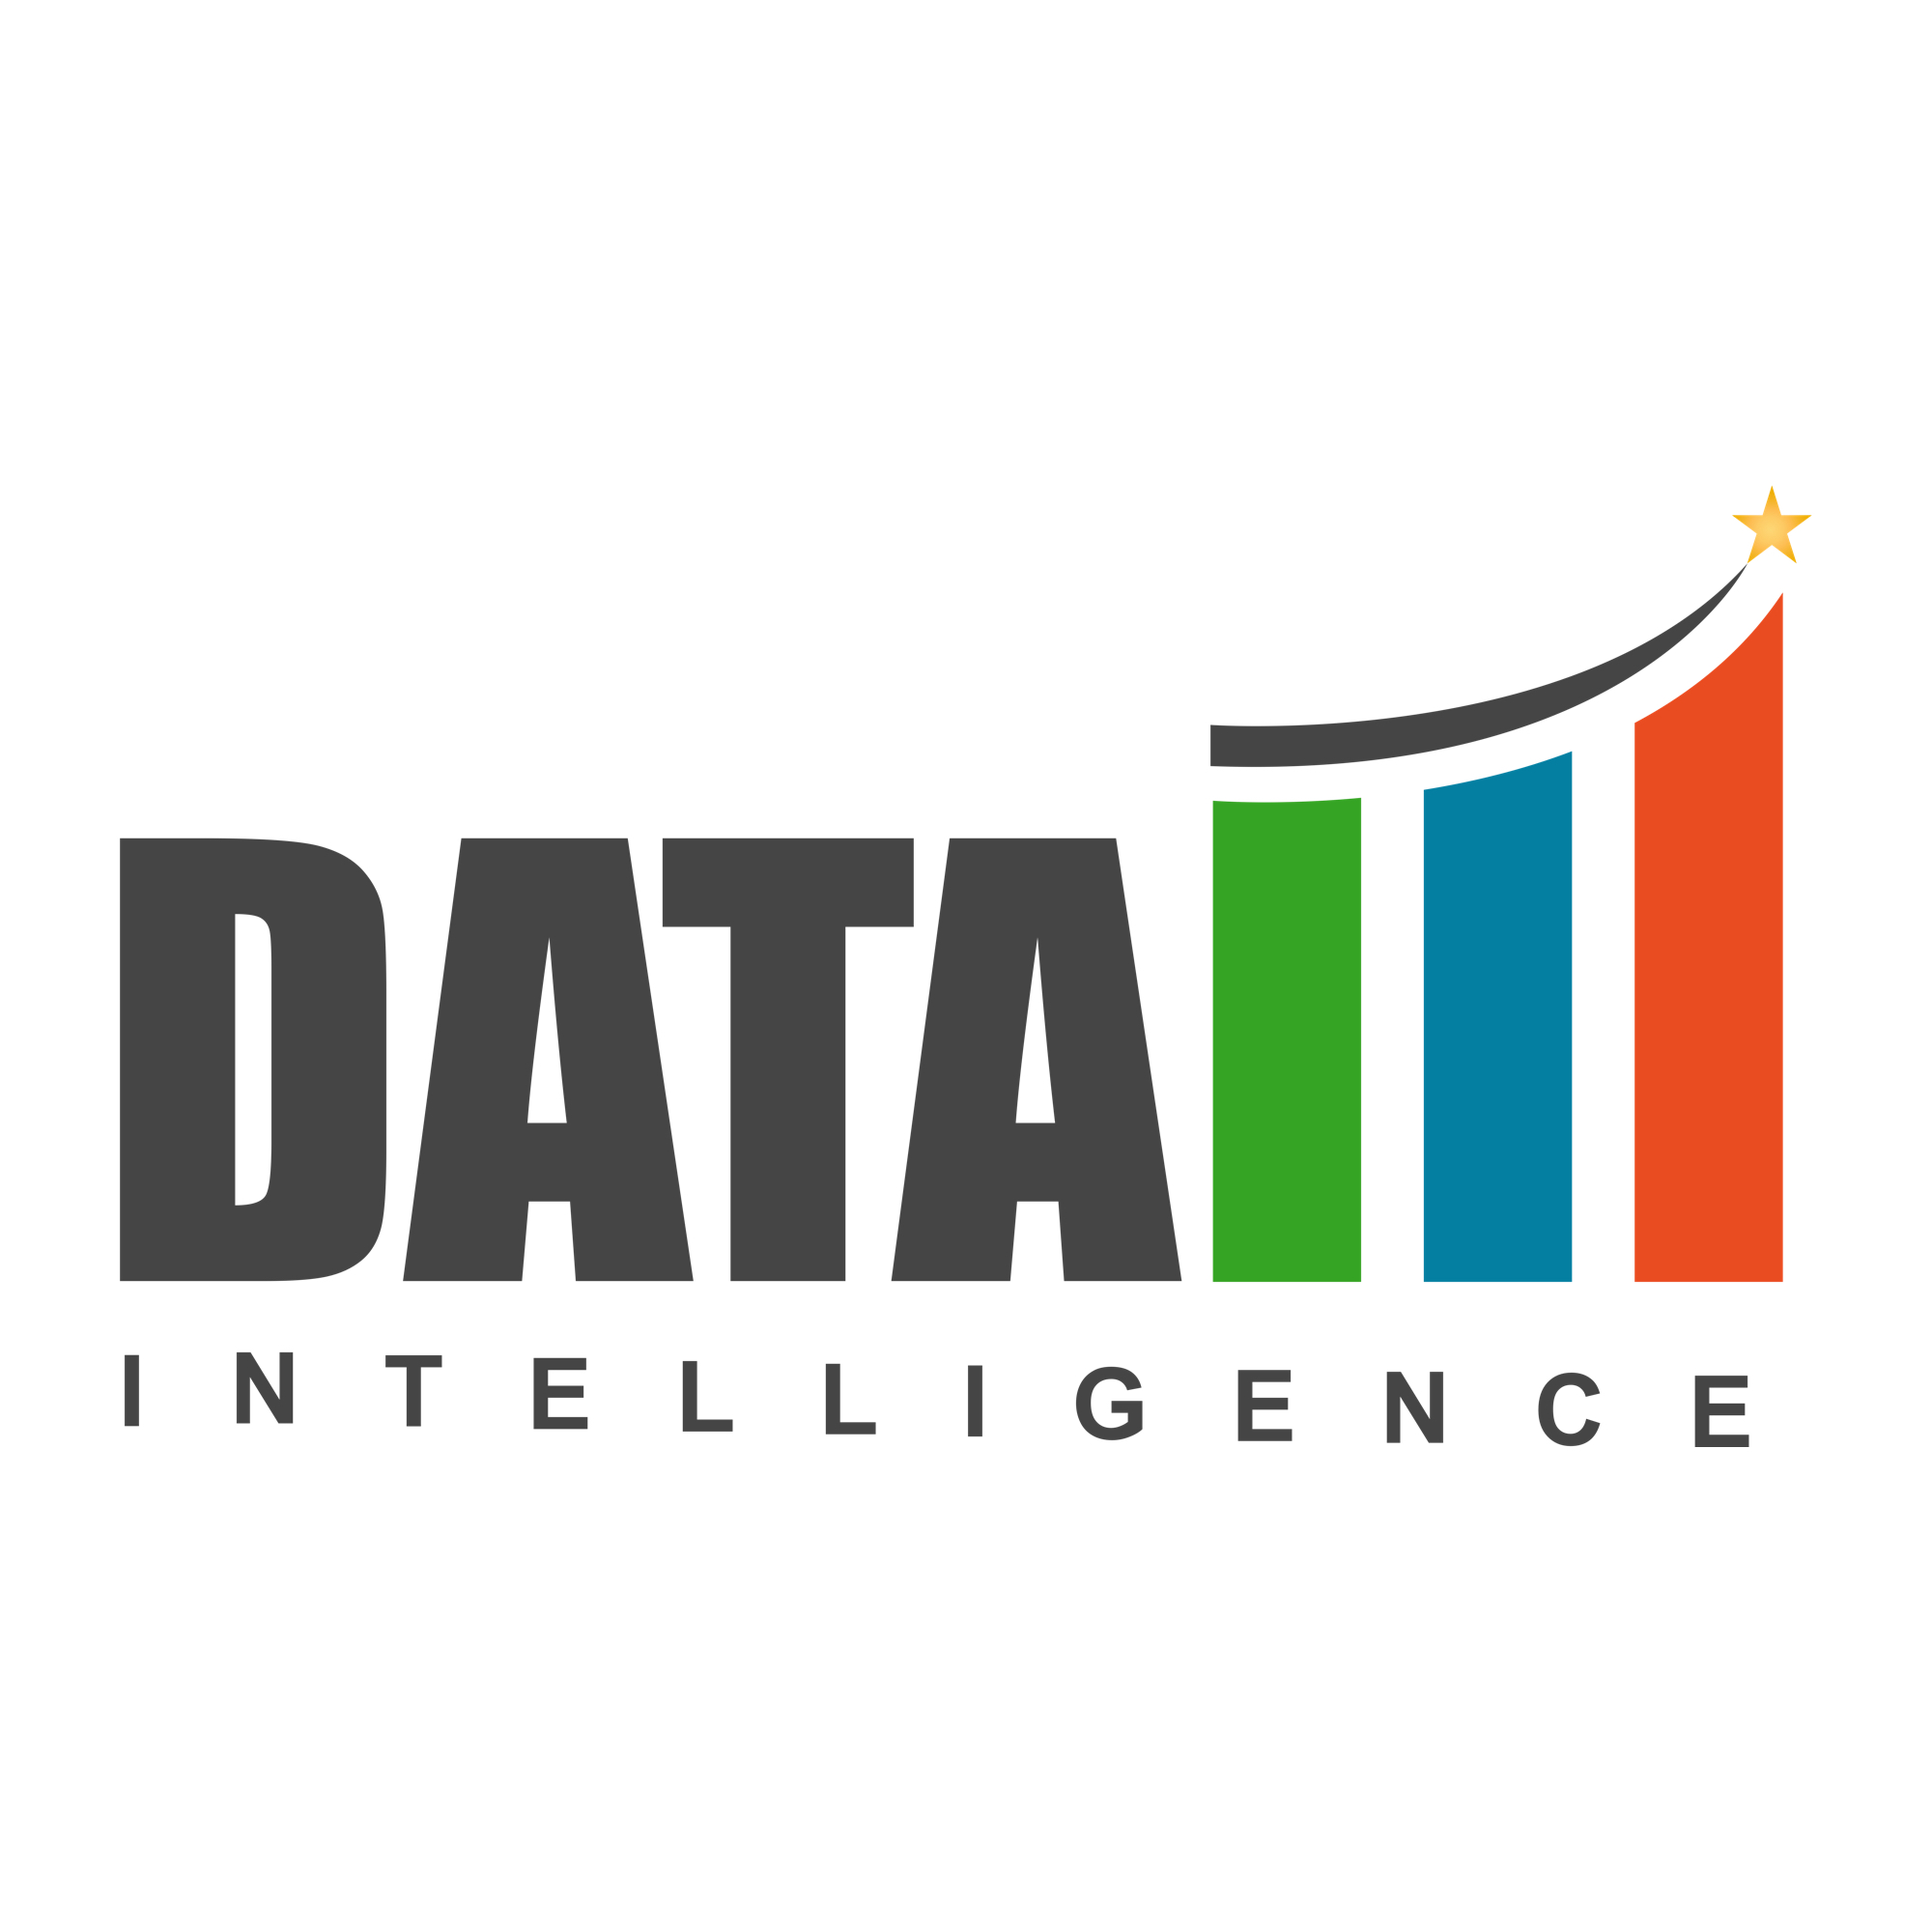 Patient Engagement Solutions Market to Grow Rapidly at a CAGR of 19.2% by 2030 | DataM Intelligence